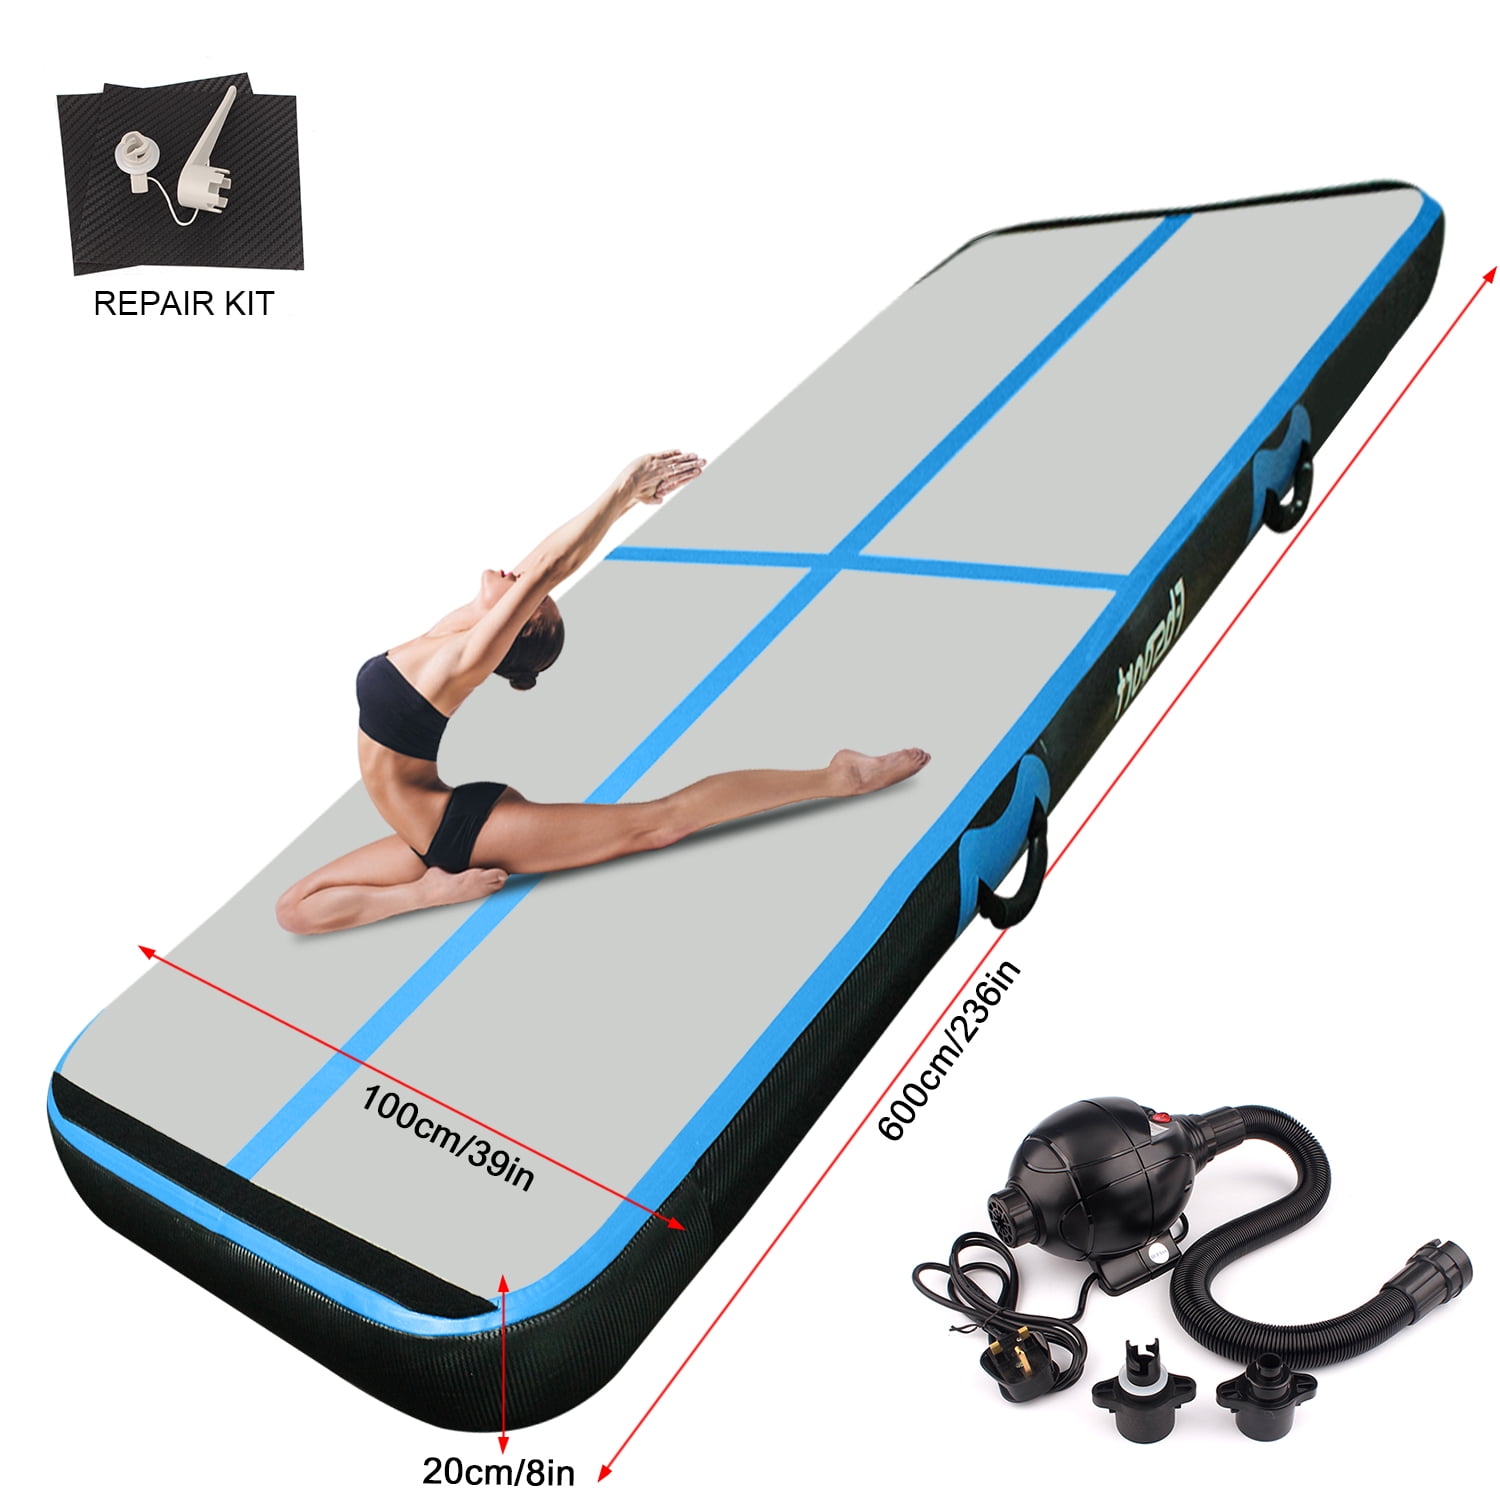 Park Cheerleading Inflatable Gymnastics Mat Water Air Floor Yoga Mat for Training FBSPORT 10/20cm thick Training Mat 1M Airtrack Tumbling Mat Indoor & Outdoor Use Exercise Fitness Mat Parkour withouut Pump 